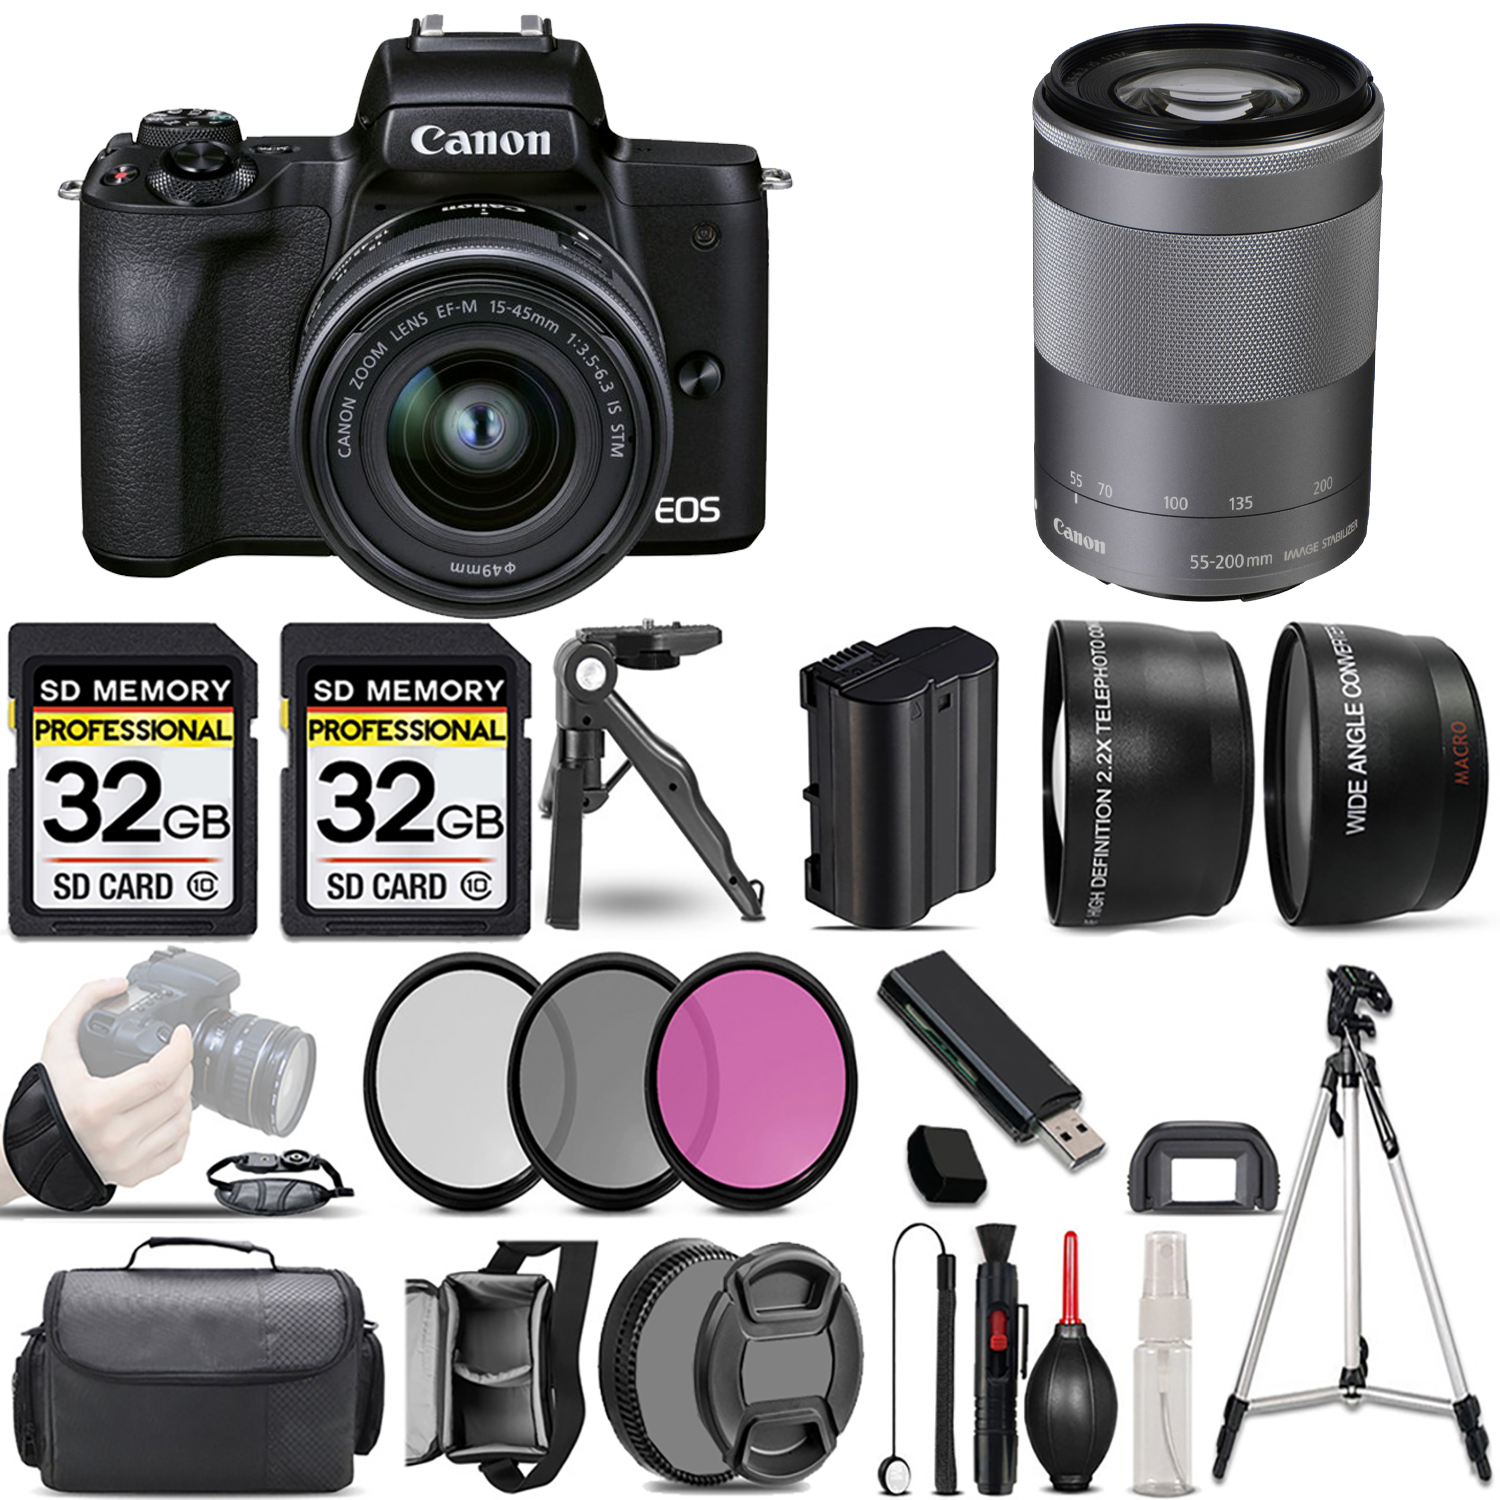 M50 II + 15-45mm Lens (Black) + 55-200mm IS Lens (Silver) + 3 Piece Filter Set + 64GB *FREE SHIPPING*